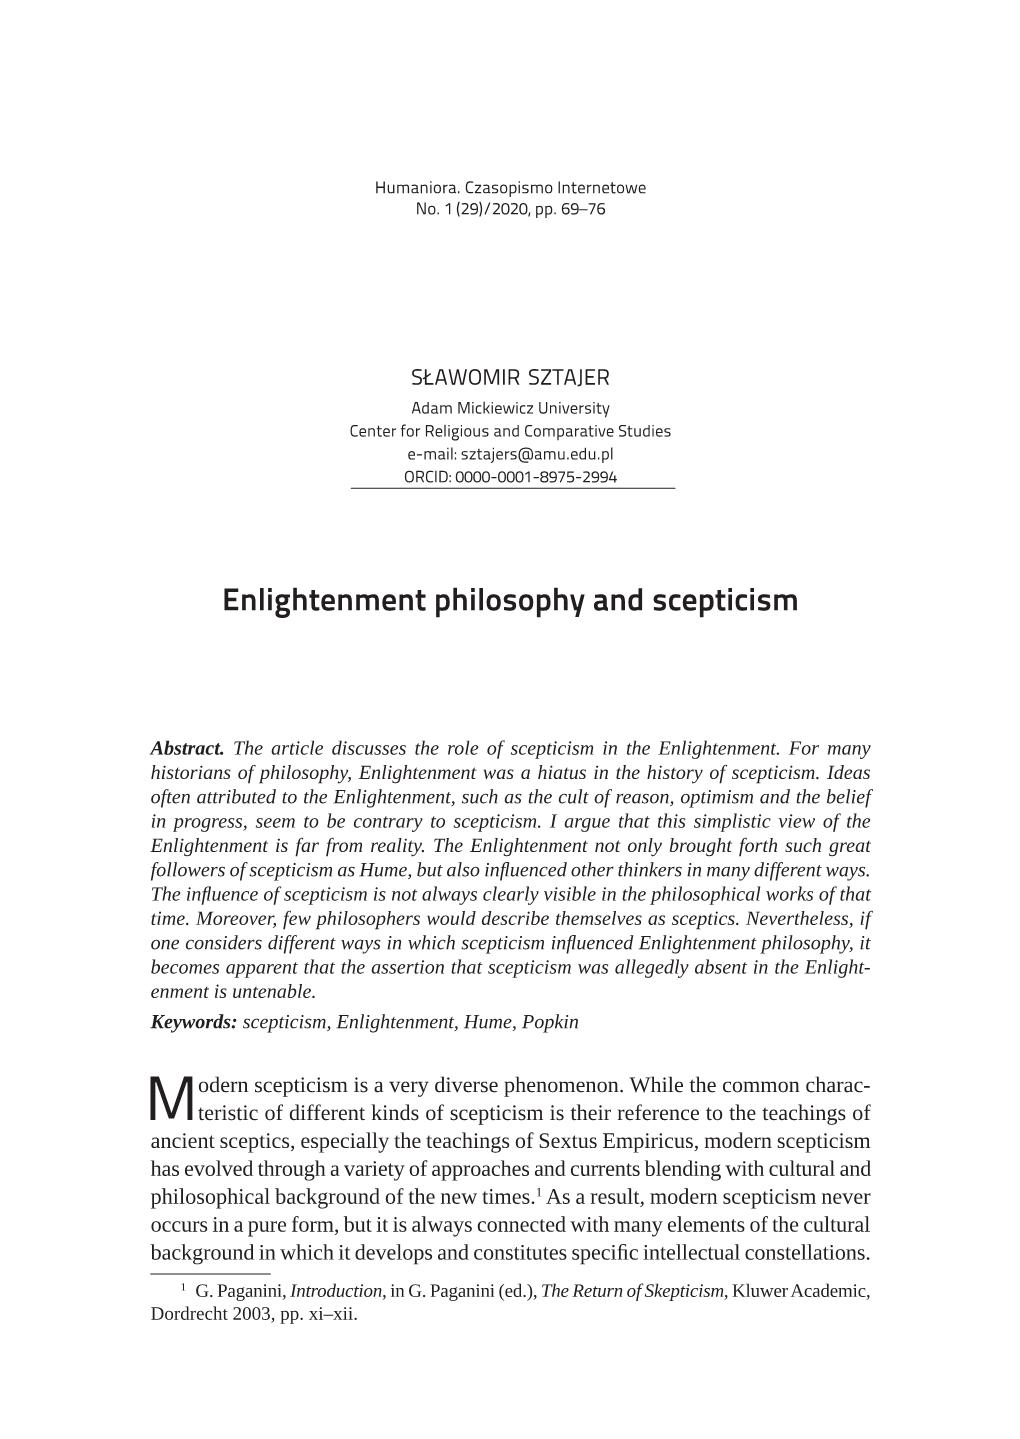 Enlightenment Philosophy and Scepticism